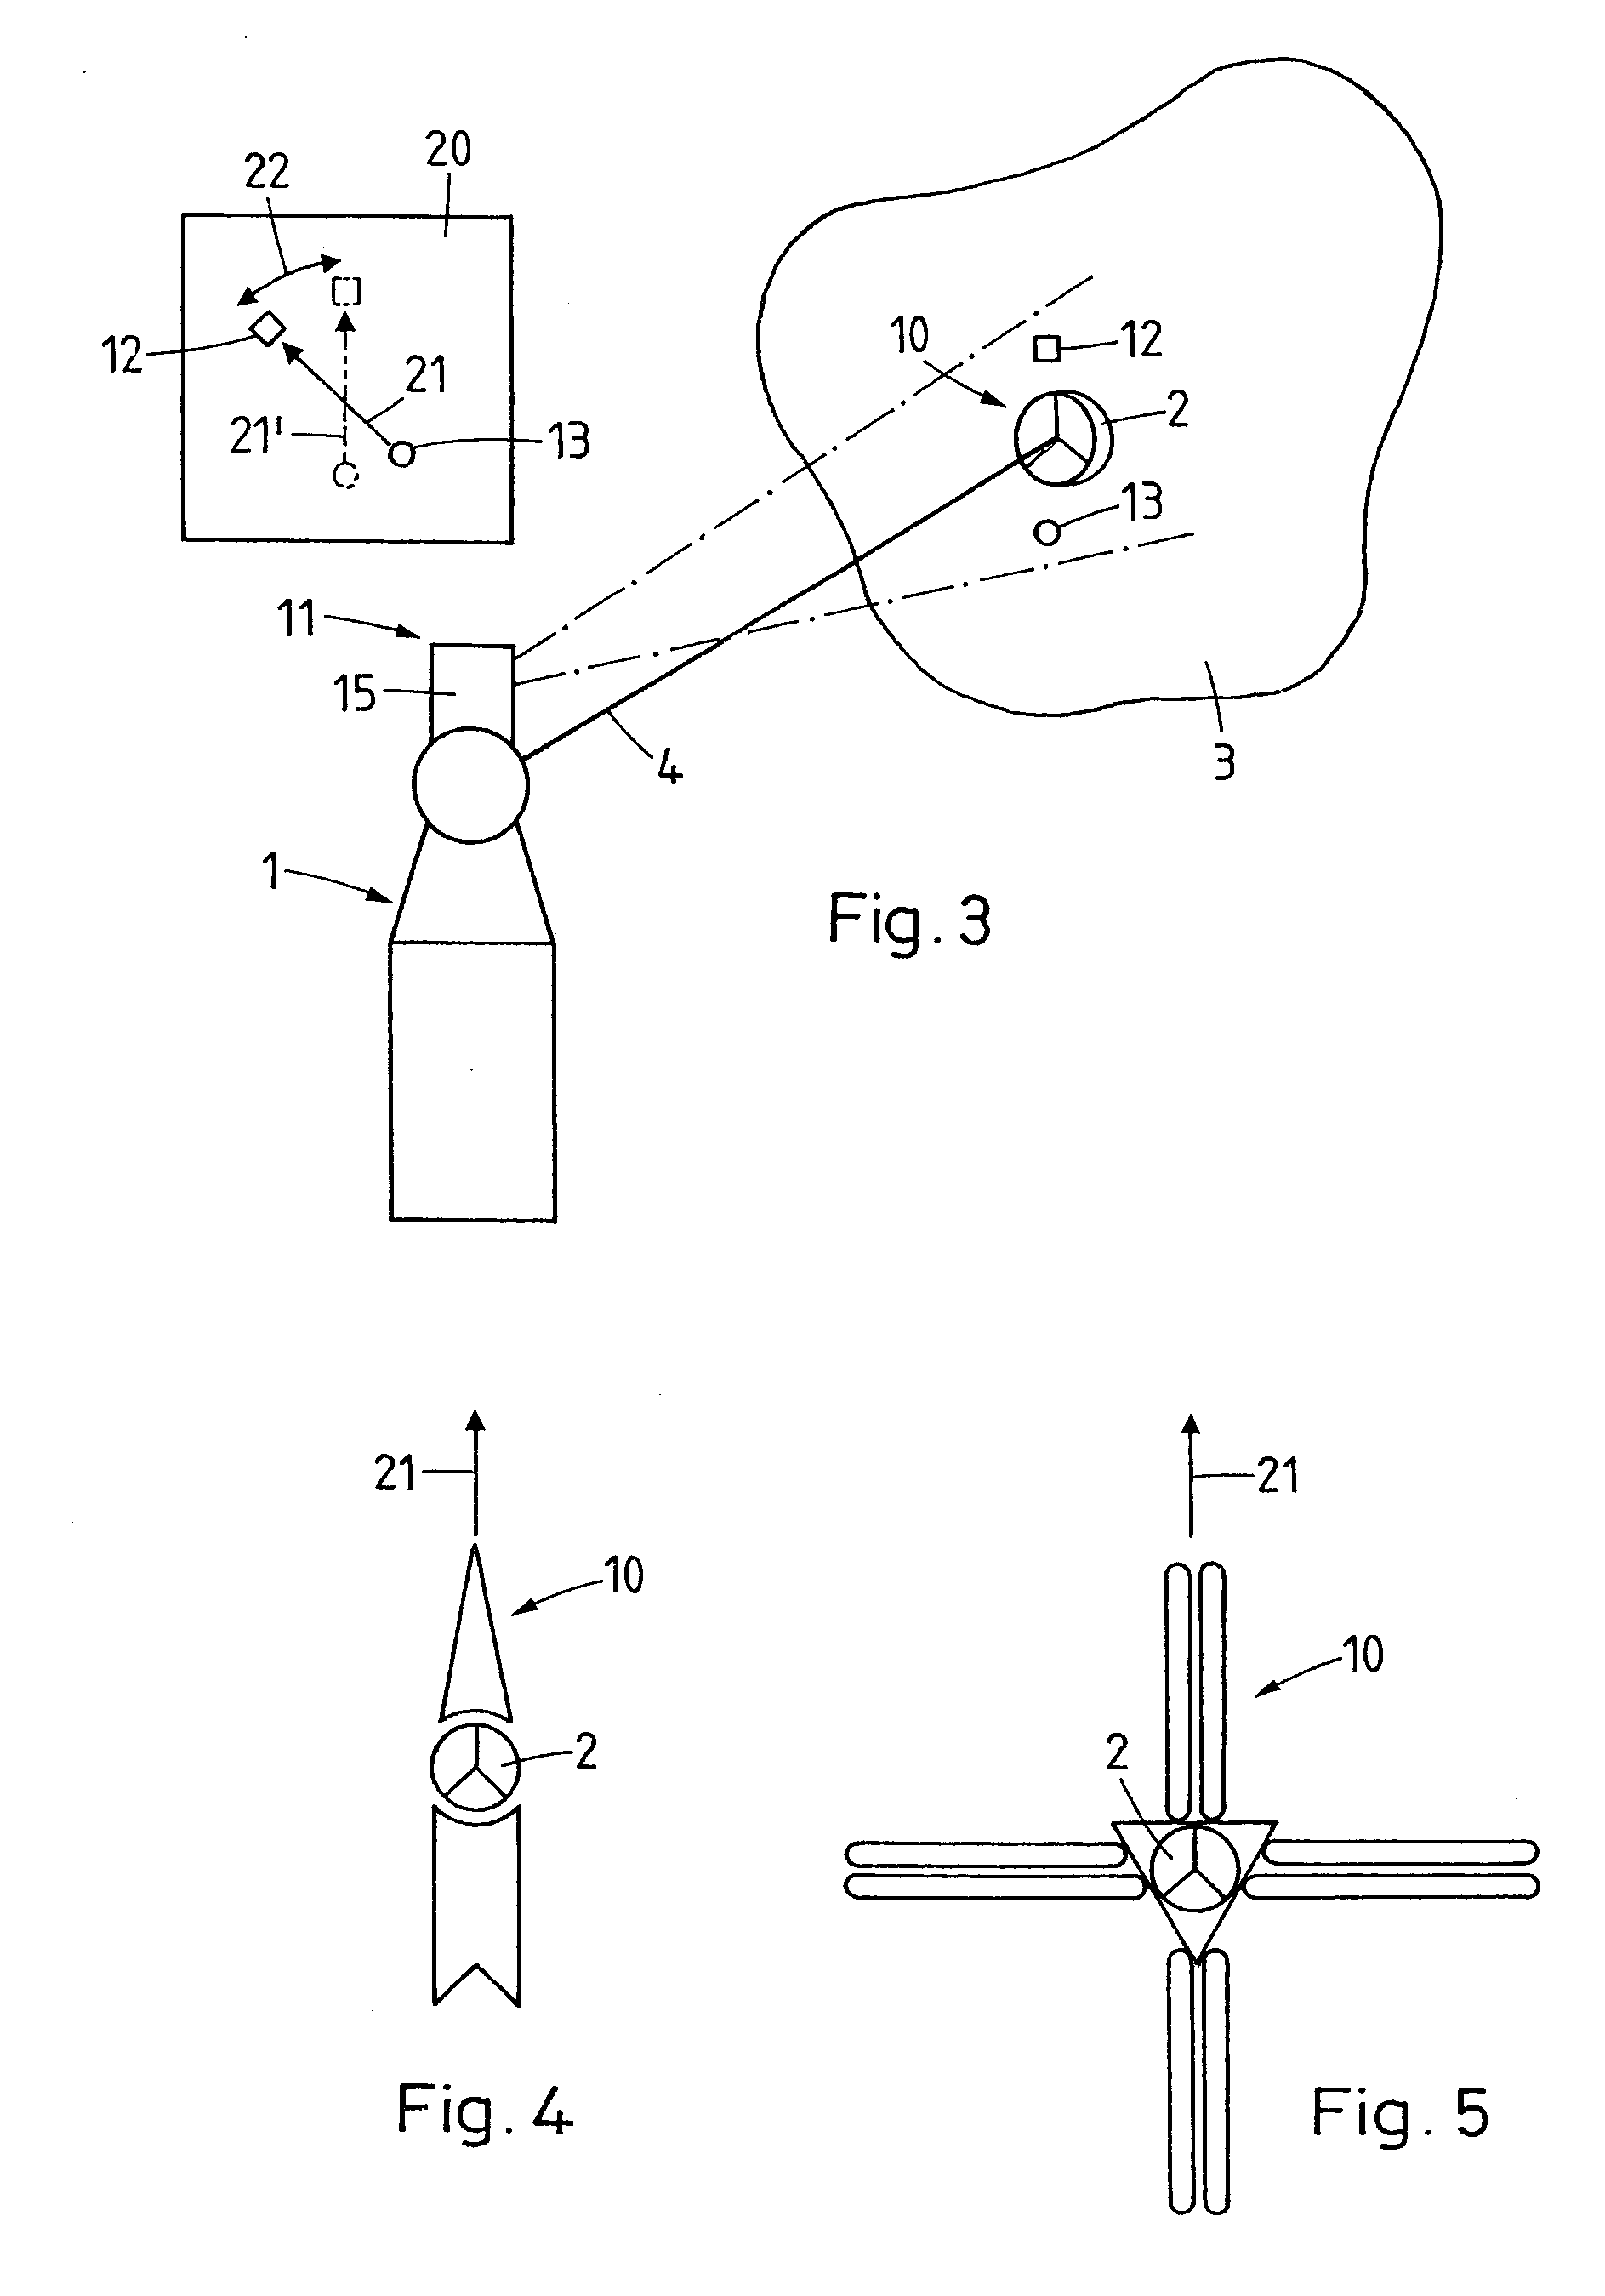 Measurement system for determining six degrees of freedom of an object